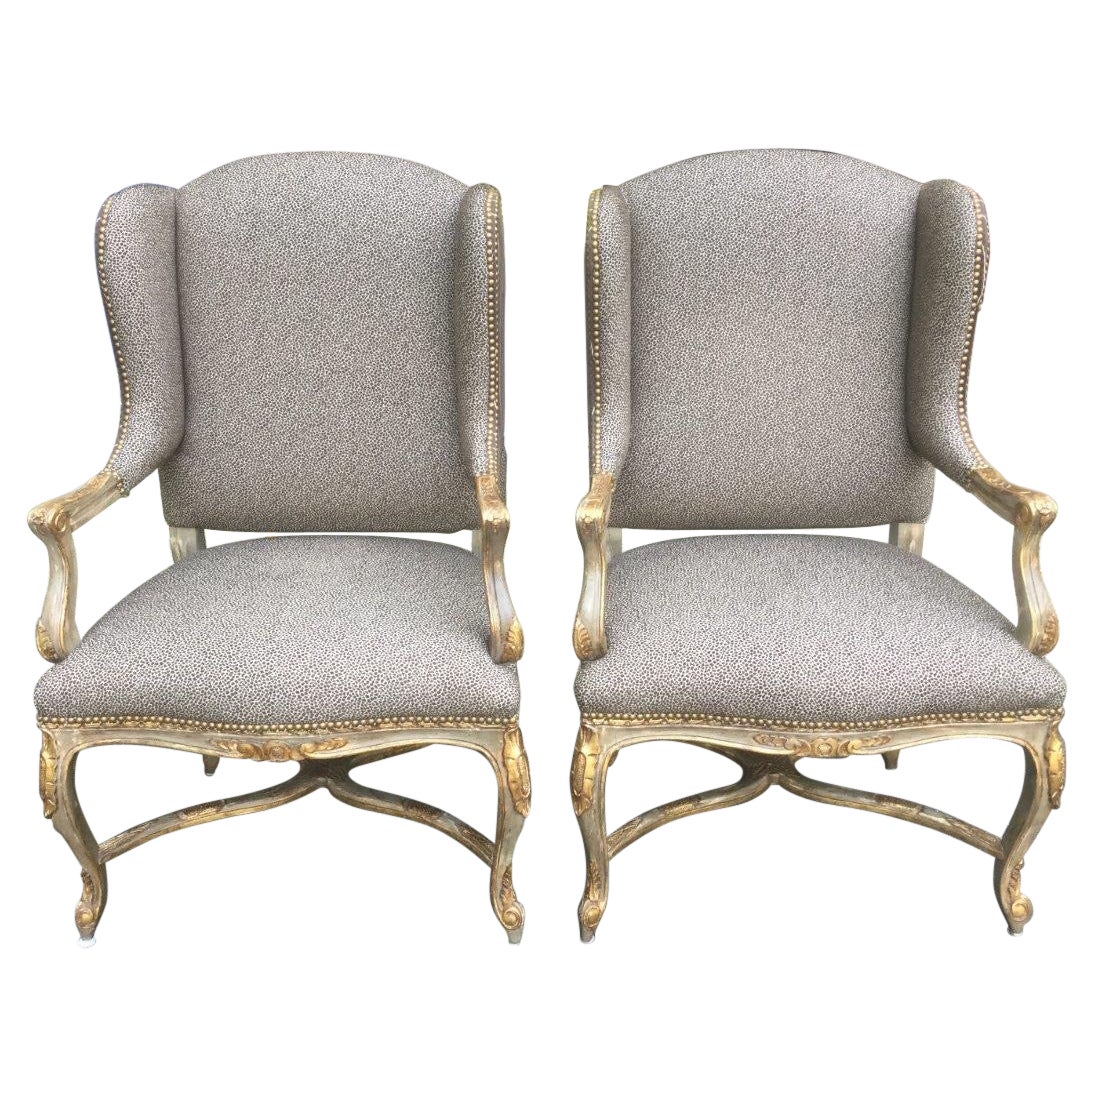 Glam Pair of Silver Painted French Wingback Chairs with Cheetah Upholstery